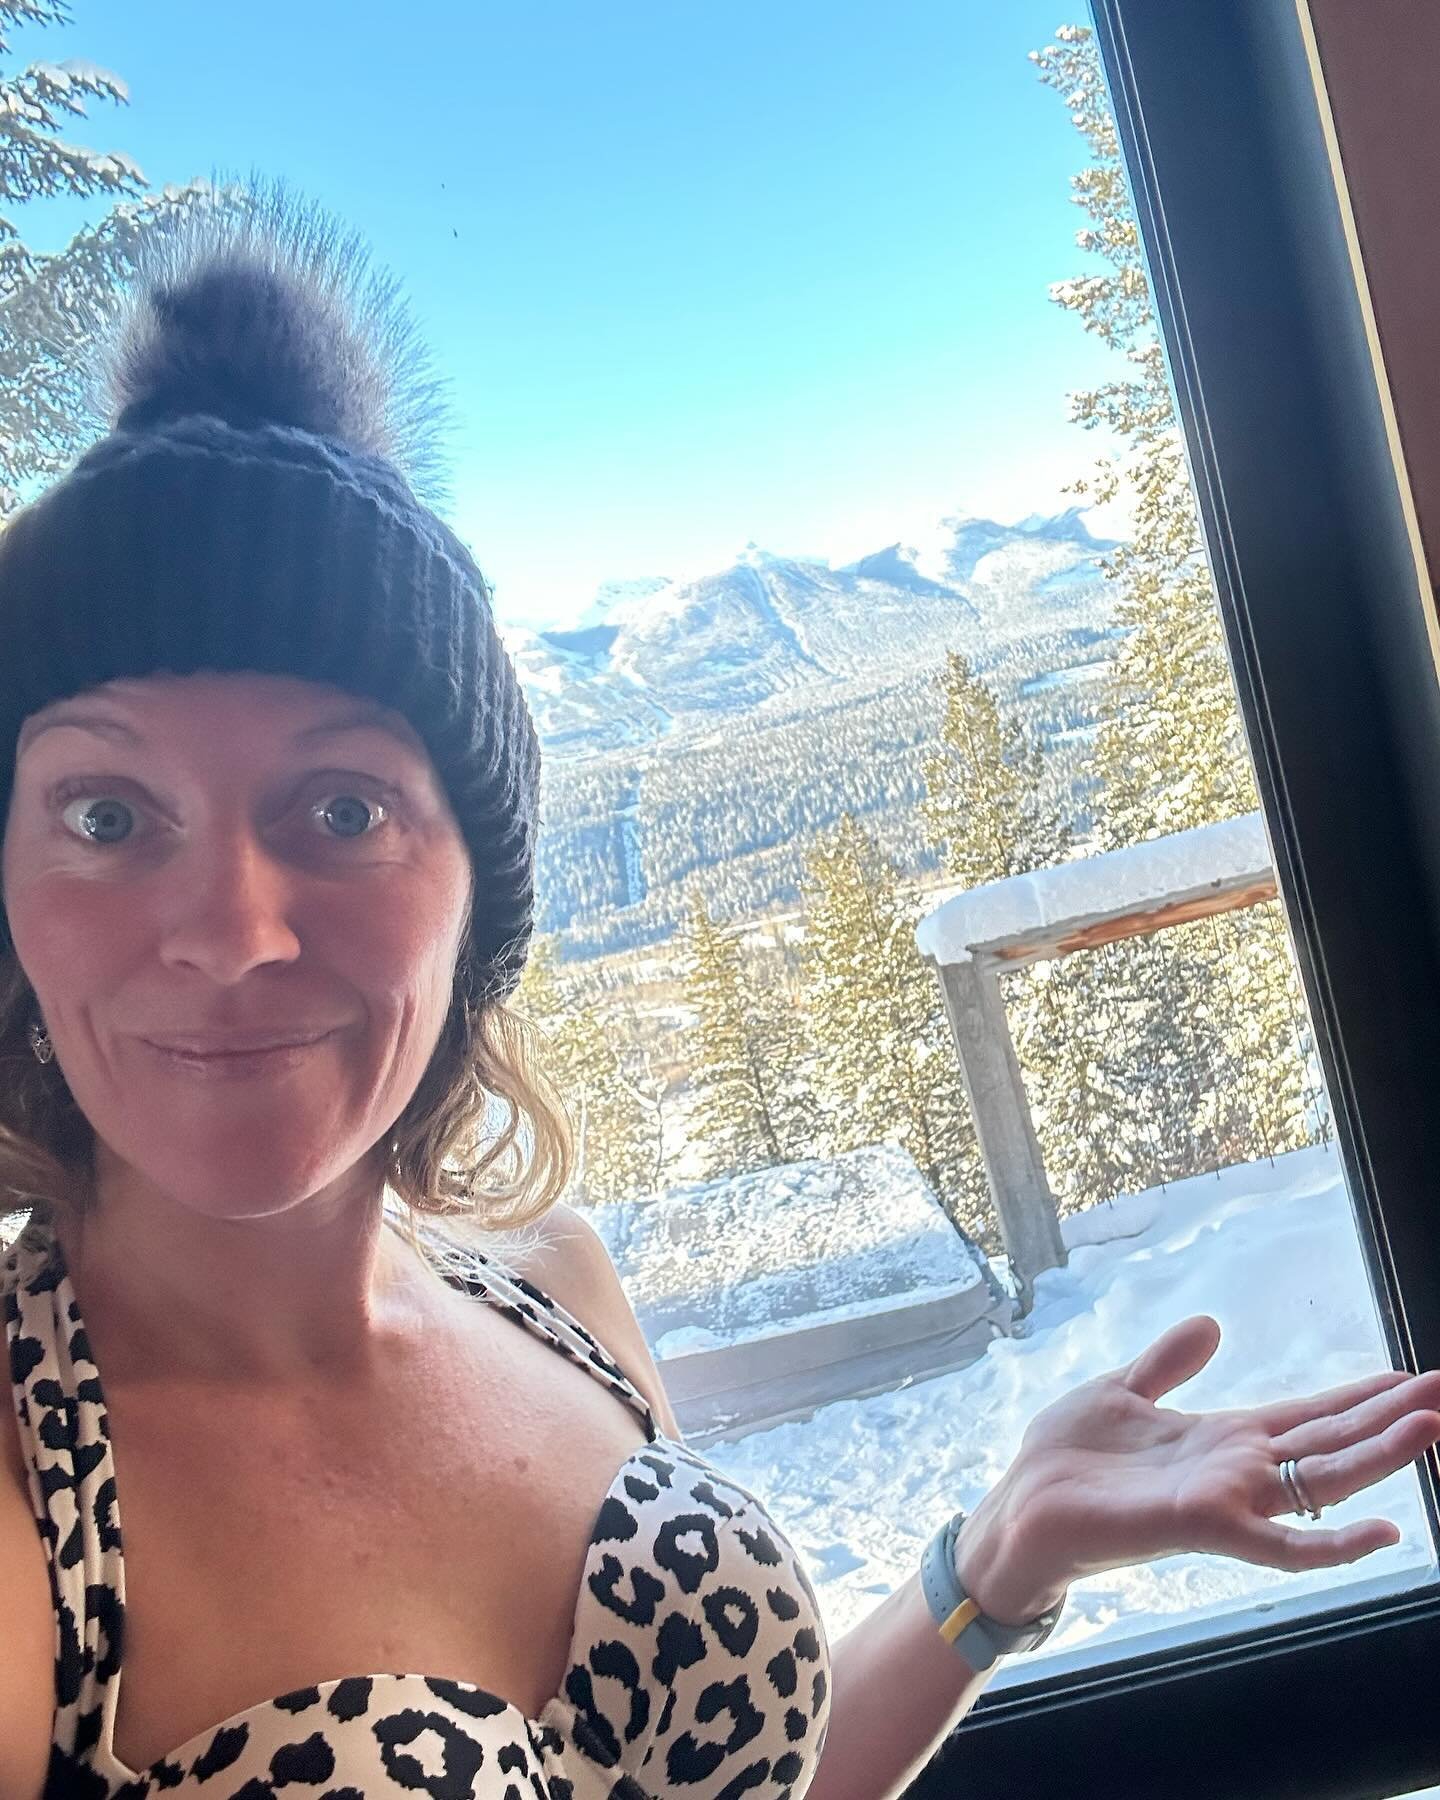 Wondering if it may still be considered a polar plunge of sorts?

😂❄️😂

#hottub #coldair #goldenbc #beautifulout #timeaway #workandplay #soloretreat #toasty